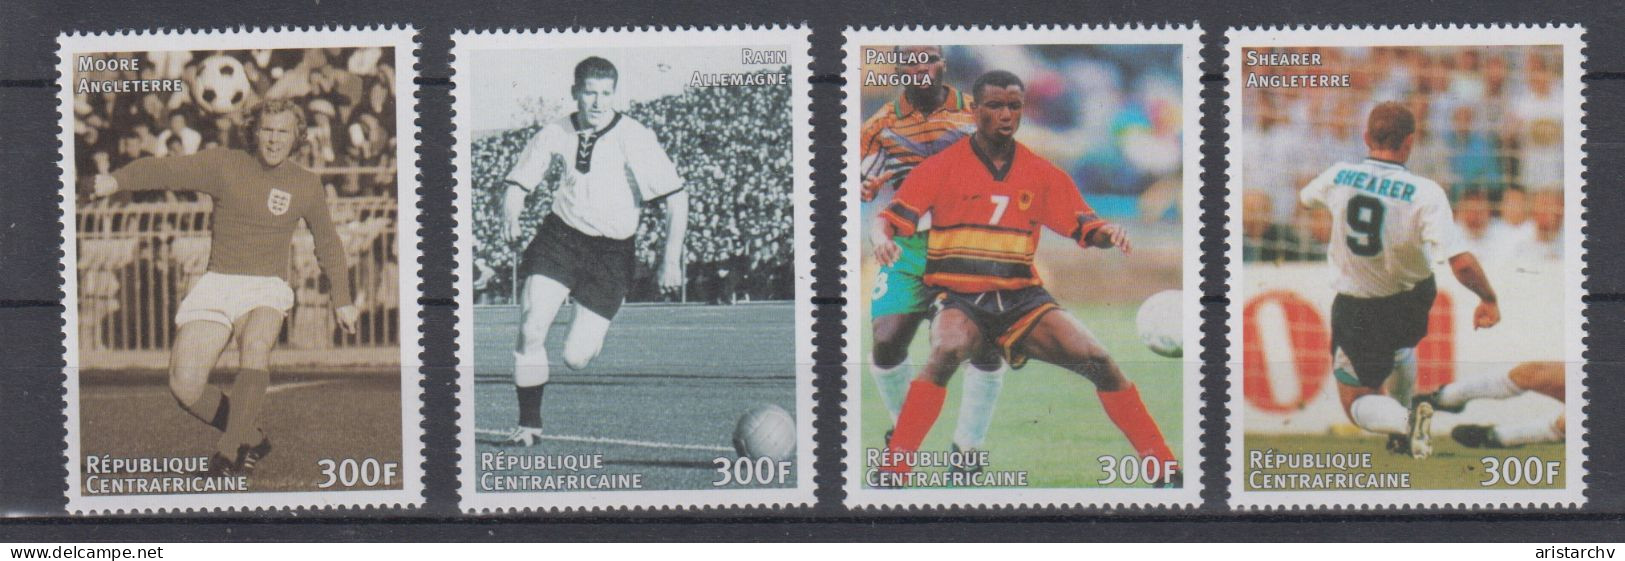 CENTRAL AFRICAN REPUBLIC 1998 FOOTBALL WORLD CUP 2 S/SHEETS SHEETLET AND 4 STAMPS - 1998 – Frankreich